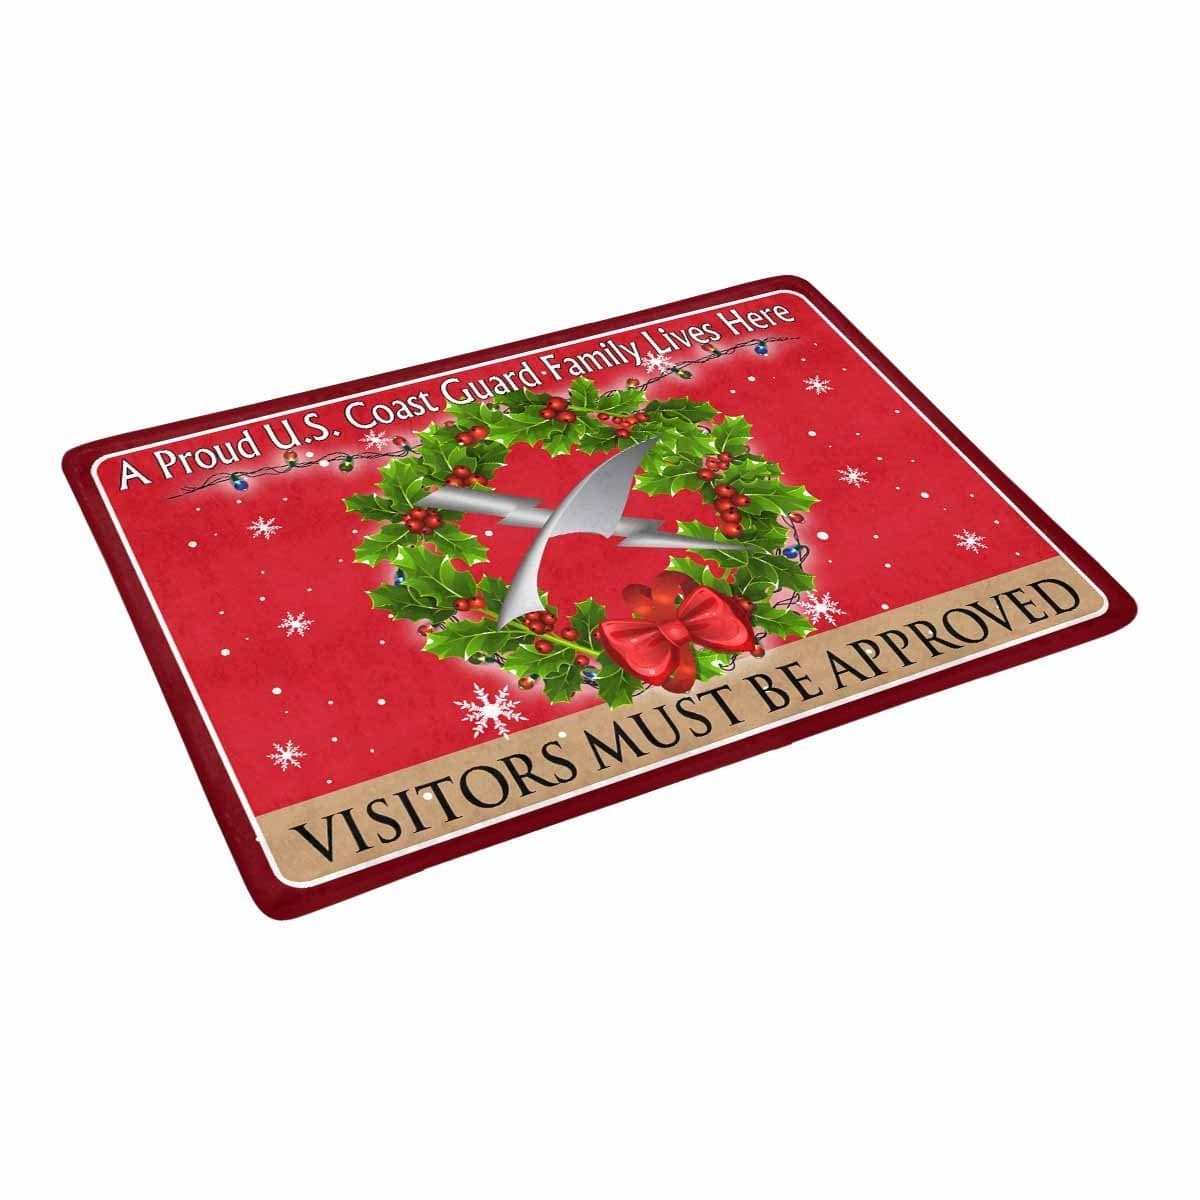 US Coast Guard Intelligence Specialist IS Logo - Visitors must be approved Christmas Doormat-Doormat-USCG-Rate-Veterans Nation